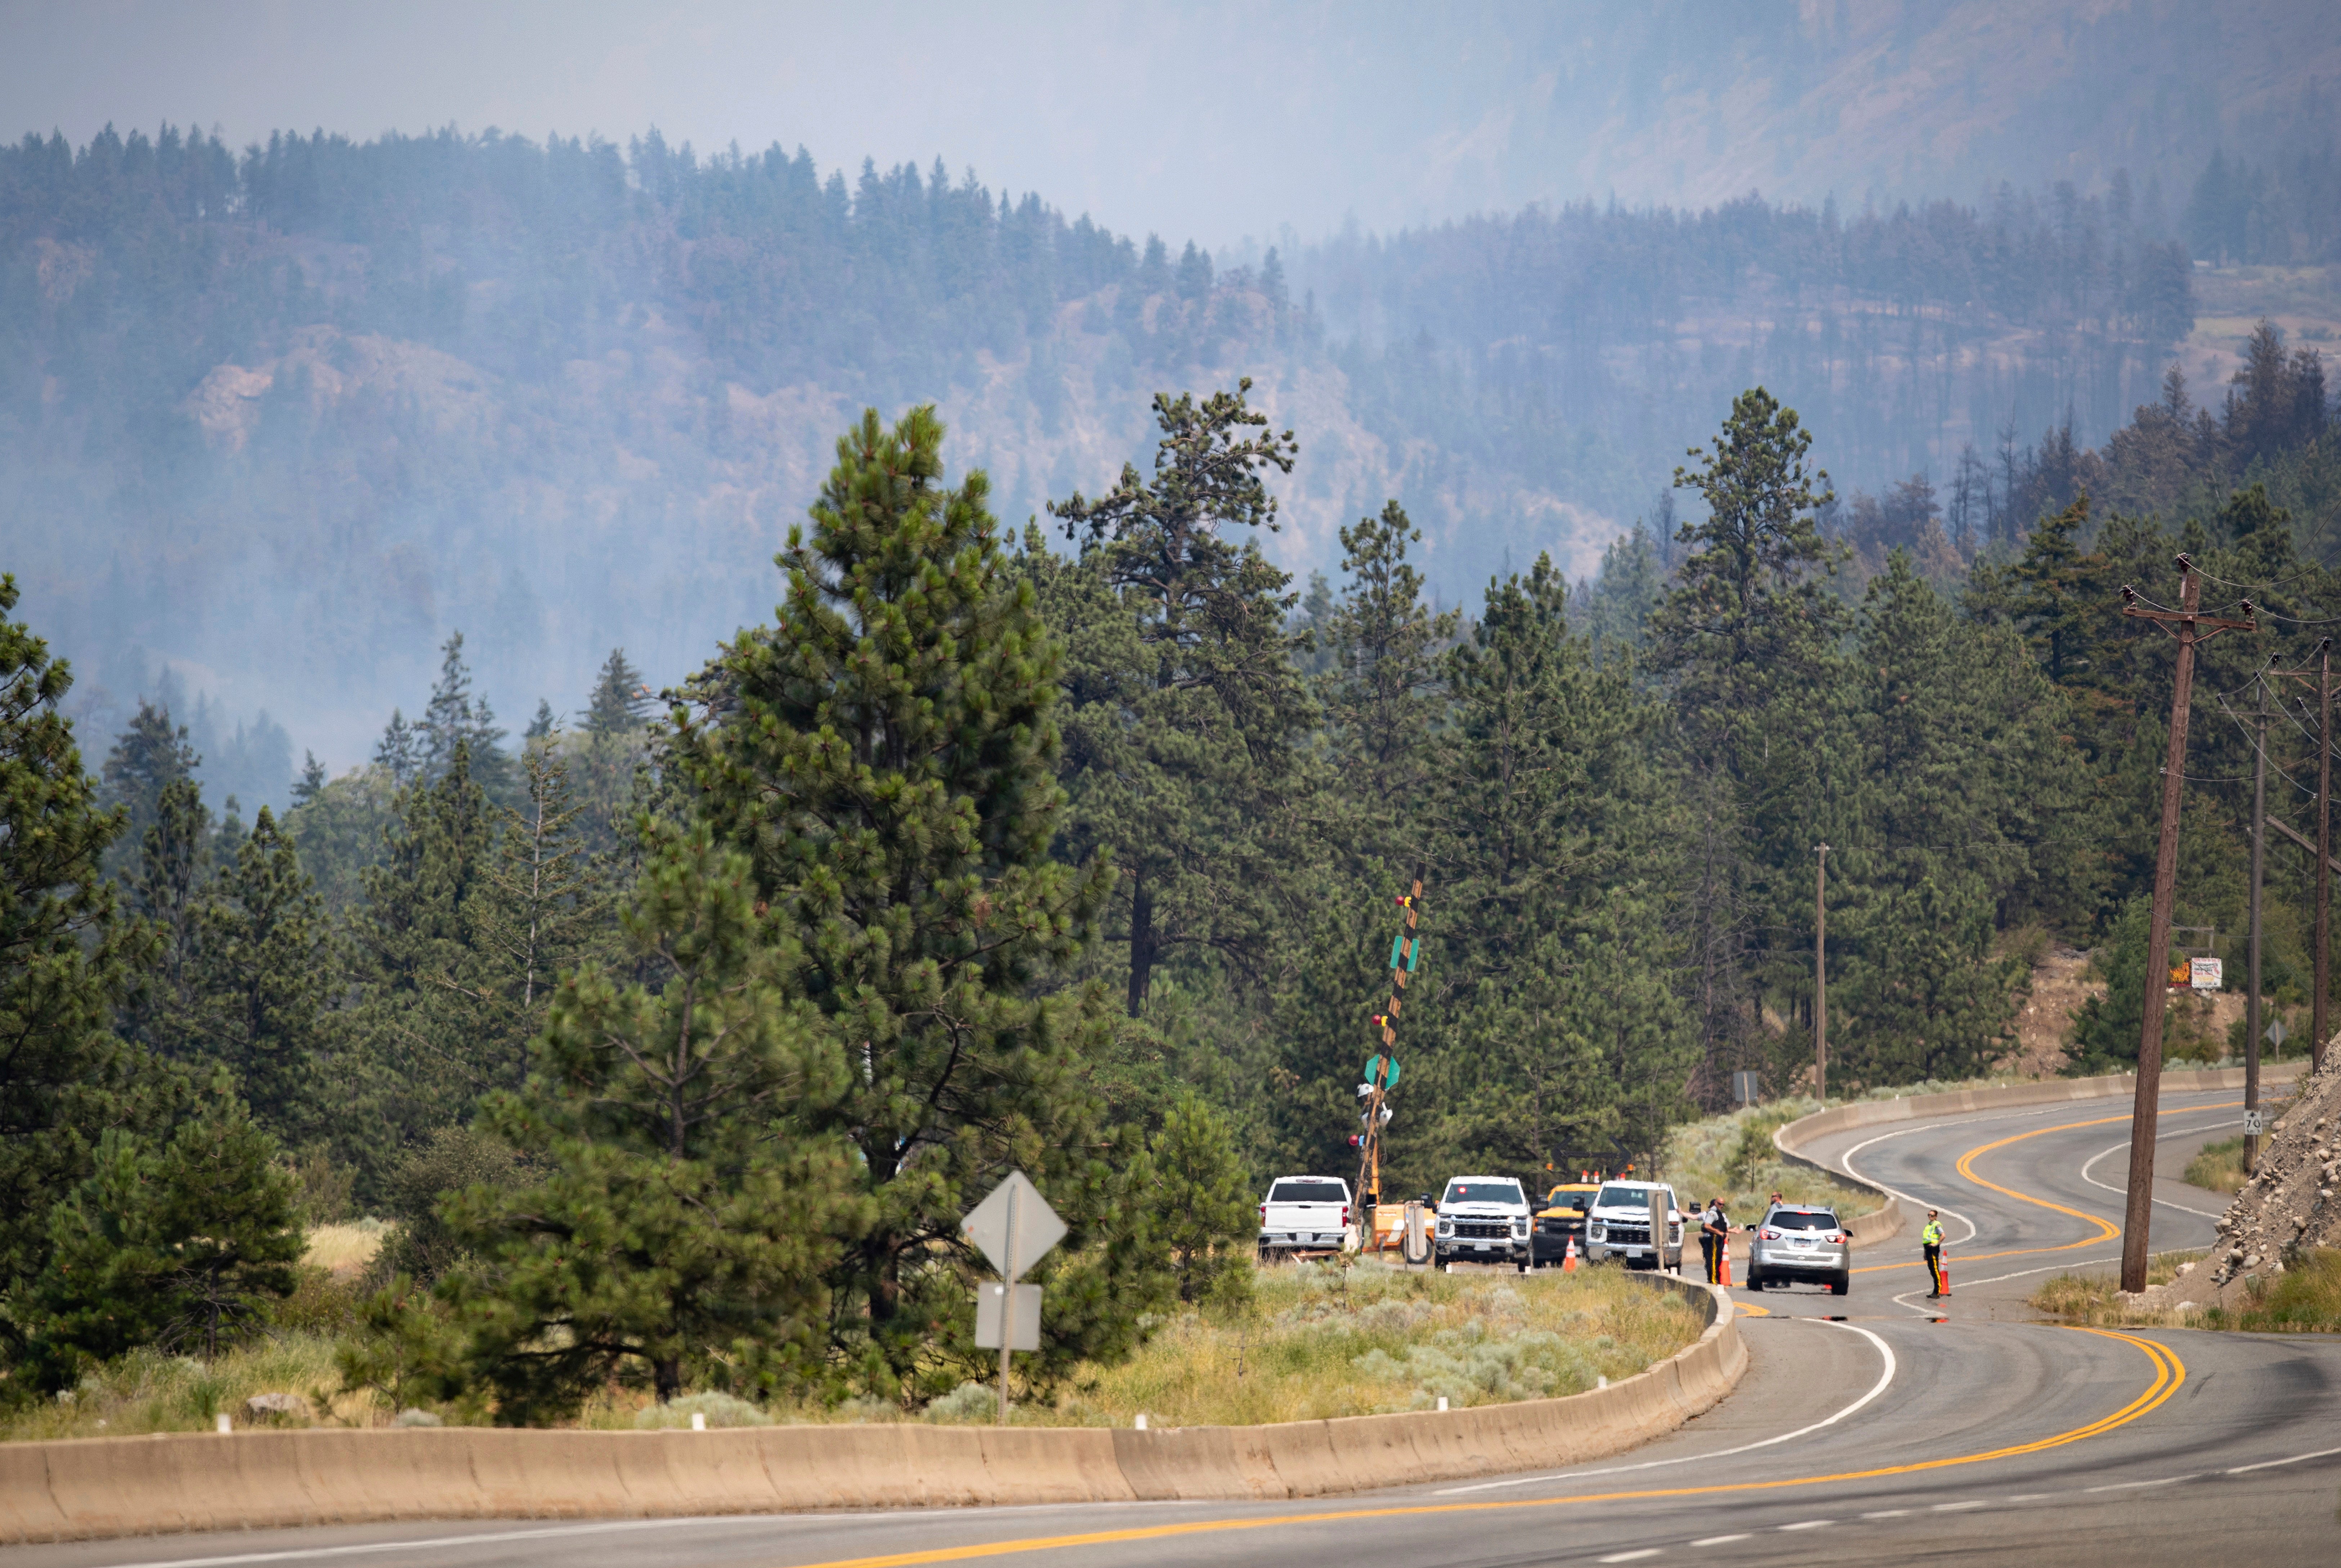 Royal Canadian Mounted Police (RCMP) officers man a roadblock on the Trans-Canada Highway as a wildfire burns in Lytton, British Columbia, Friday, July 2, 2021. Officials on Friday hunted for any missing residents of a British Columbia town destroyed by wildfire as Canadian Prime Minister Justin Trudeau offered federal assistance.